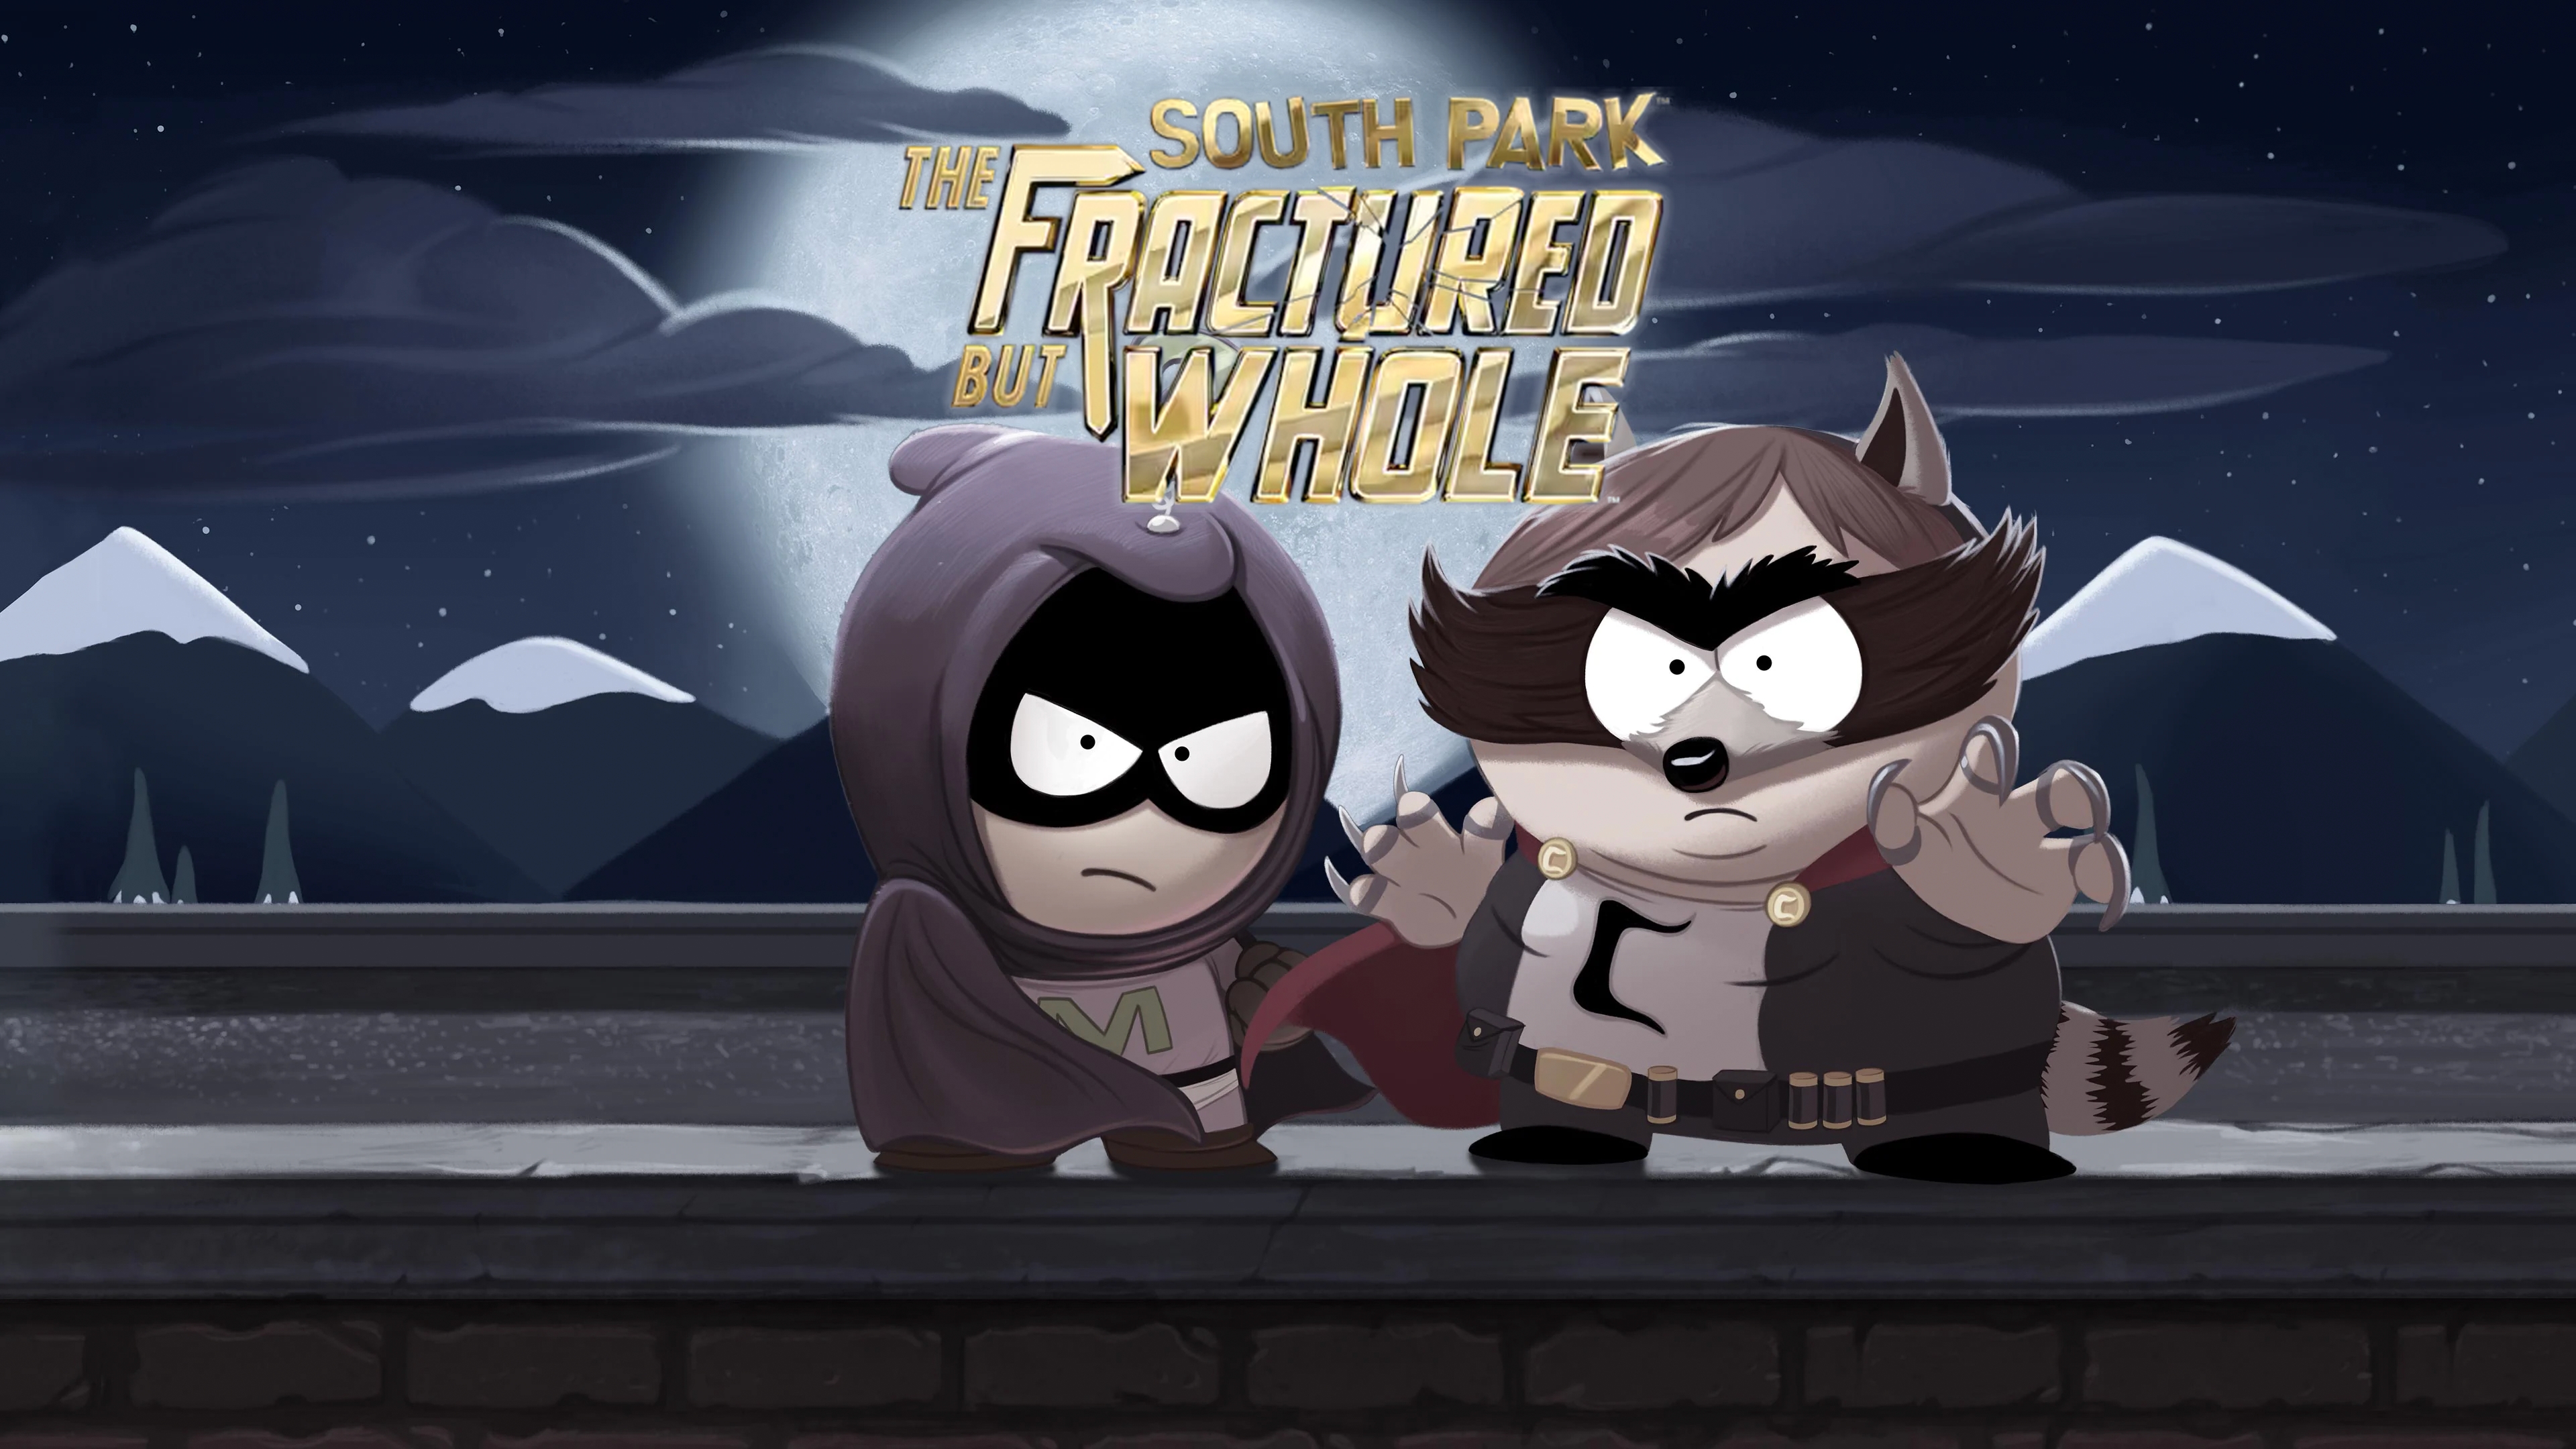 South park the fractured but whole купить ключ steam дешево фото 3